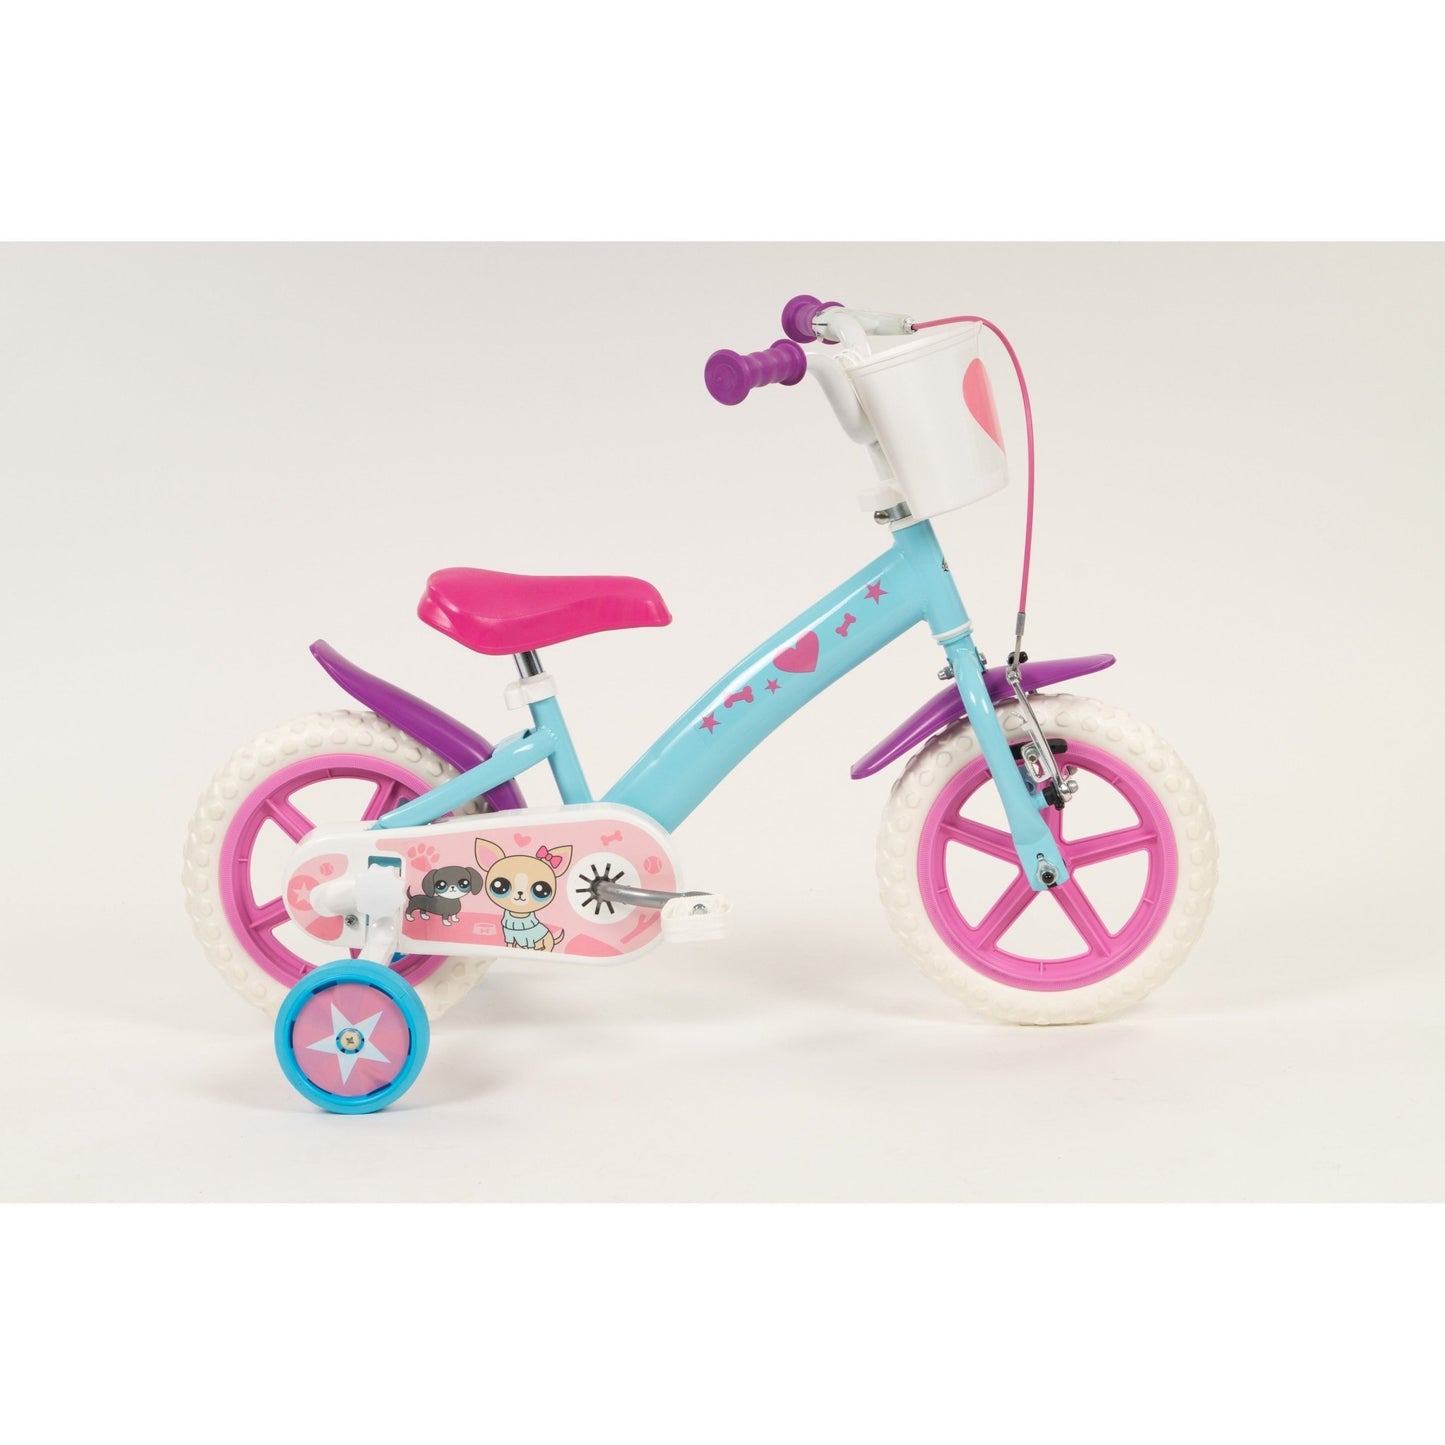 Pets Childrens Bicycle - Available in 3 Sizes - The Online Toy Shop - Bicycle - 14